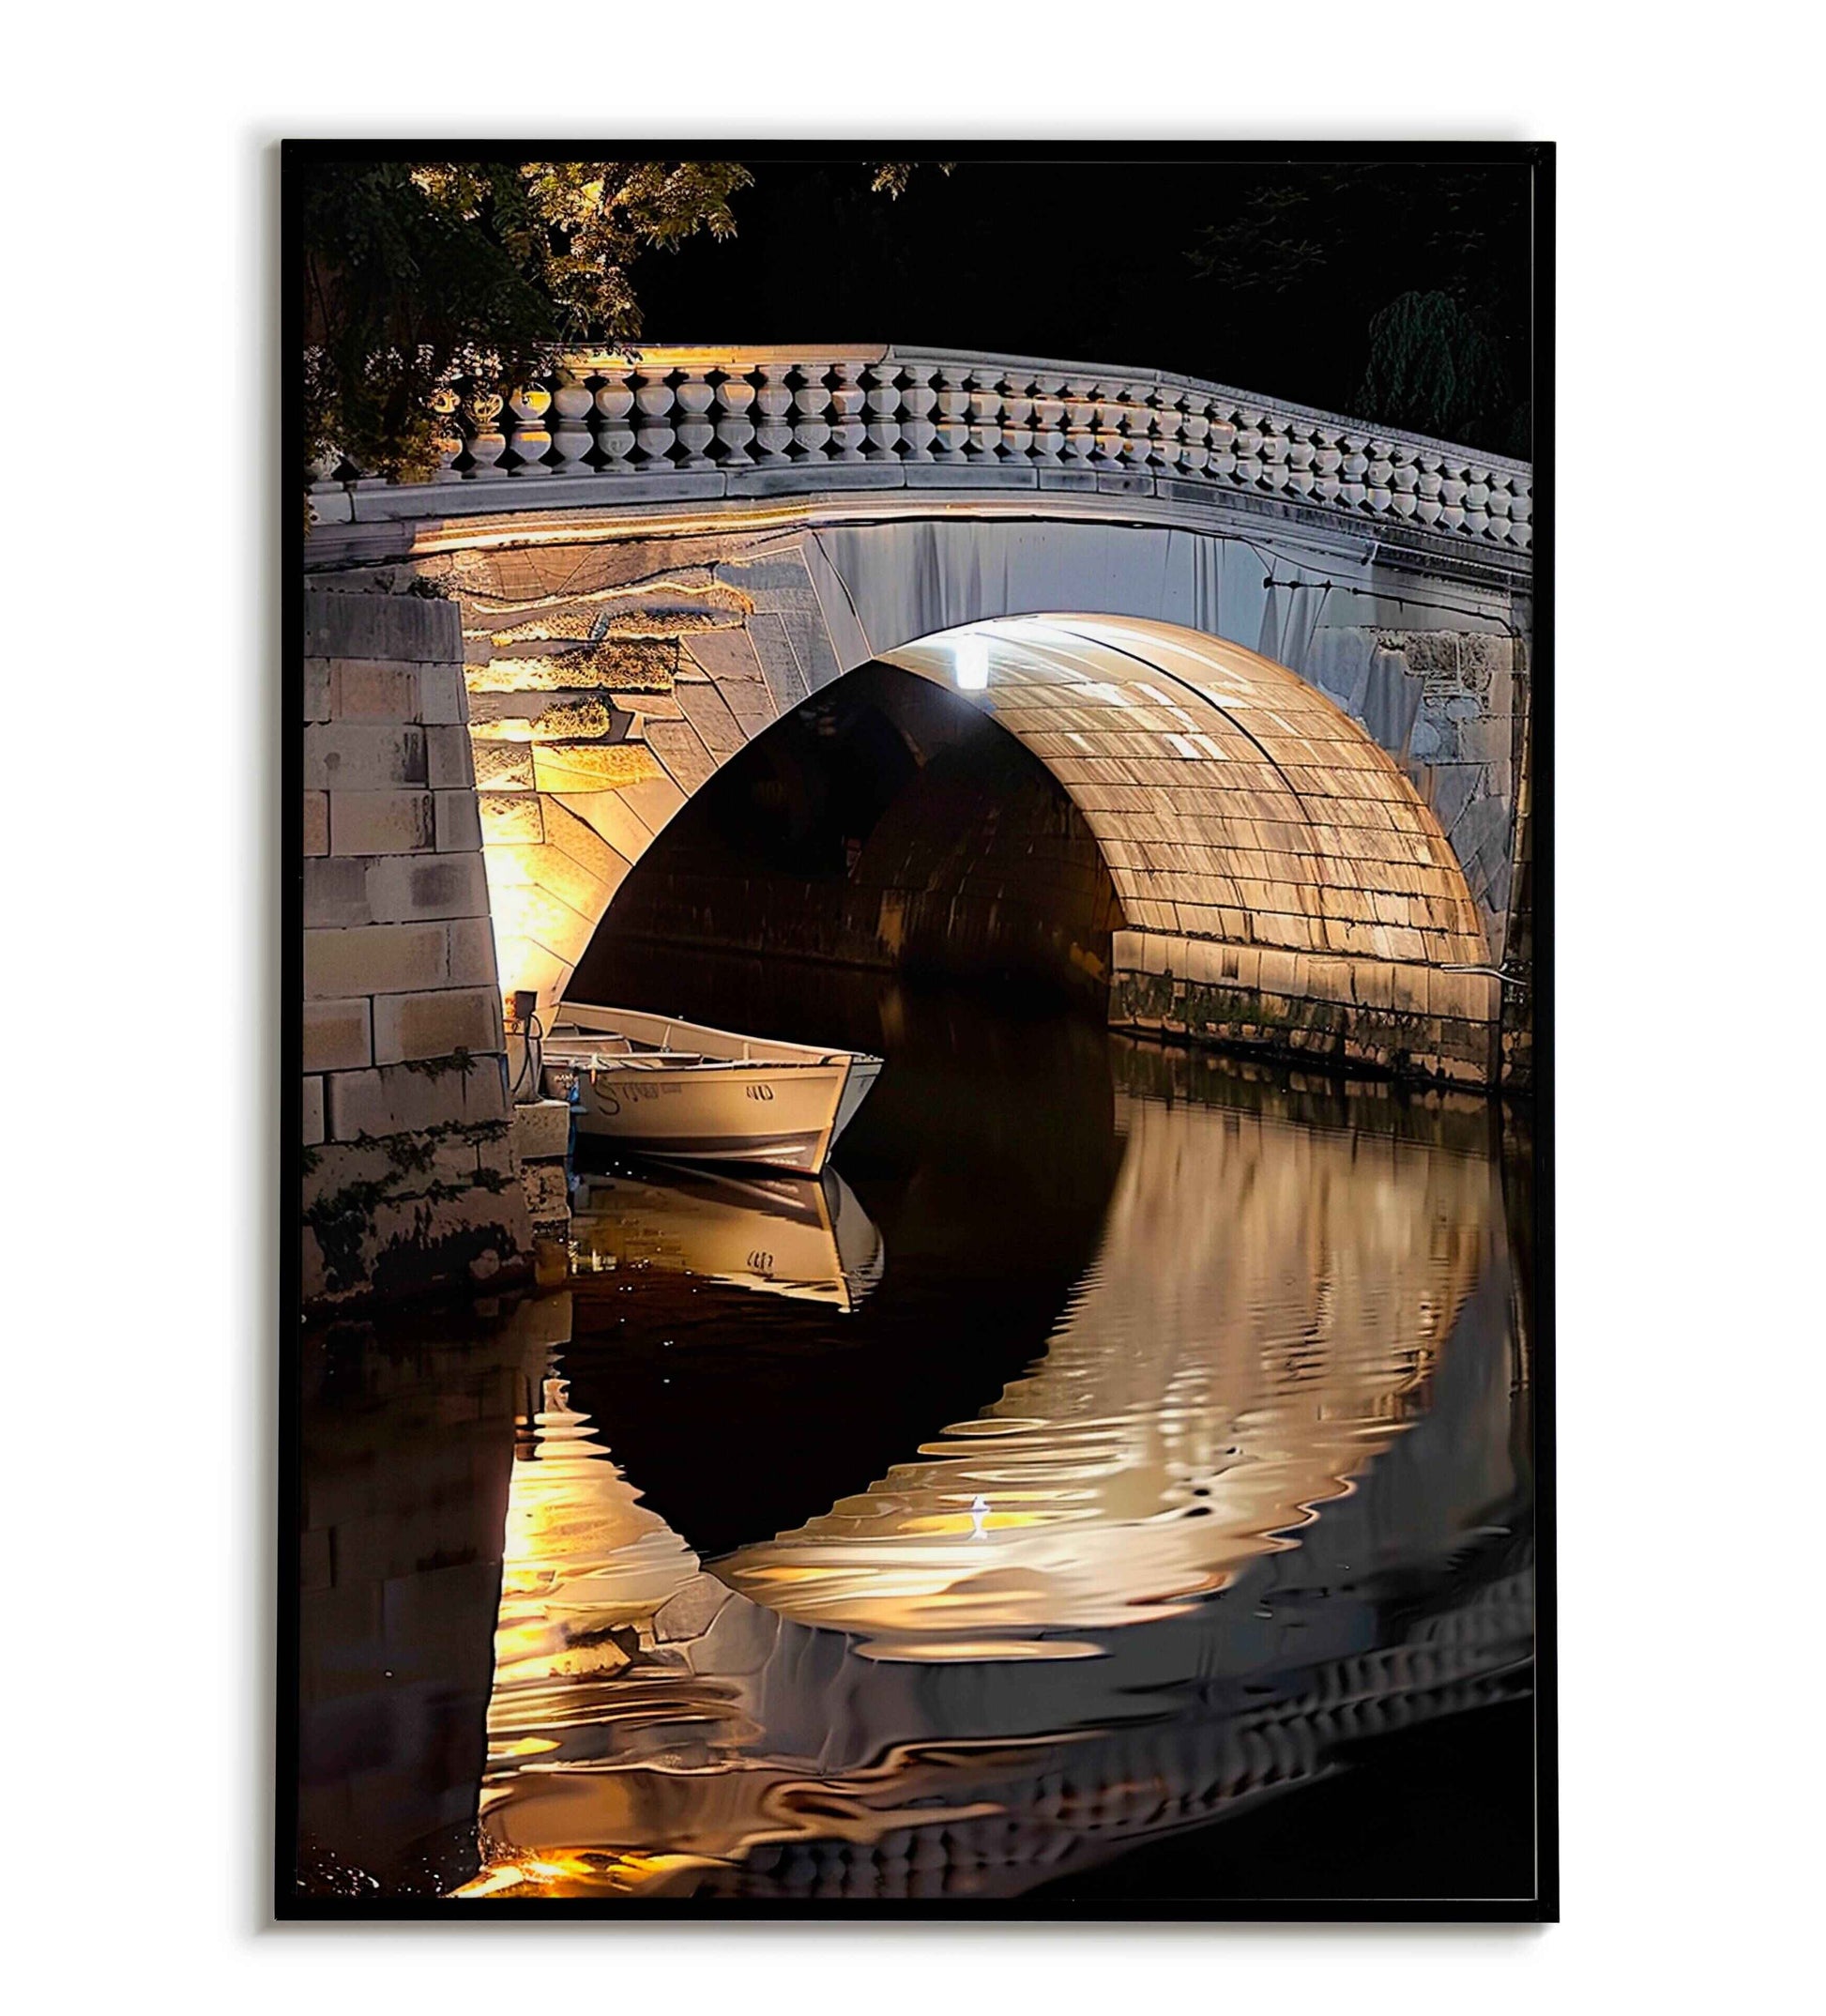 Bridge Reflections(2 of 2) printable poster. Available for purchase as a physical poster or digital download